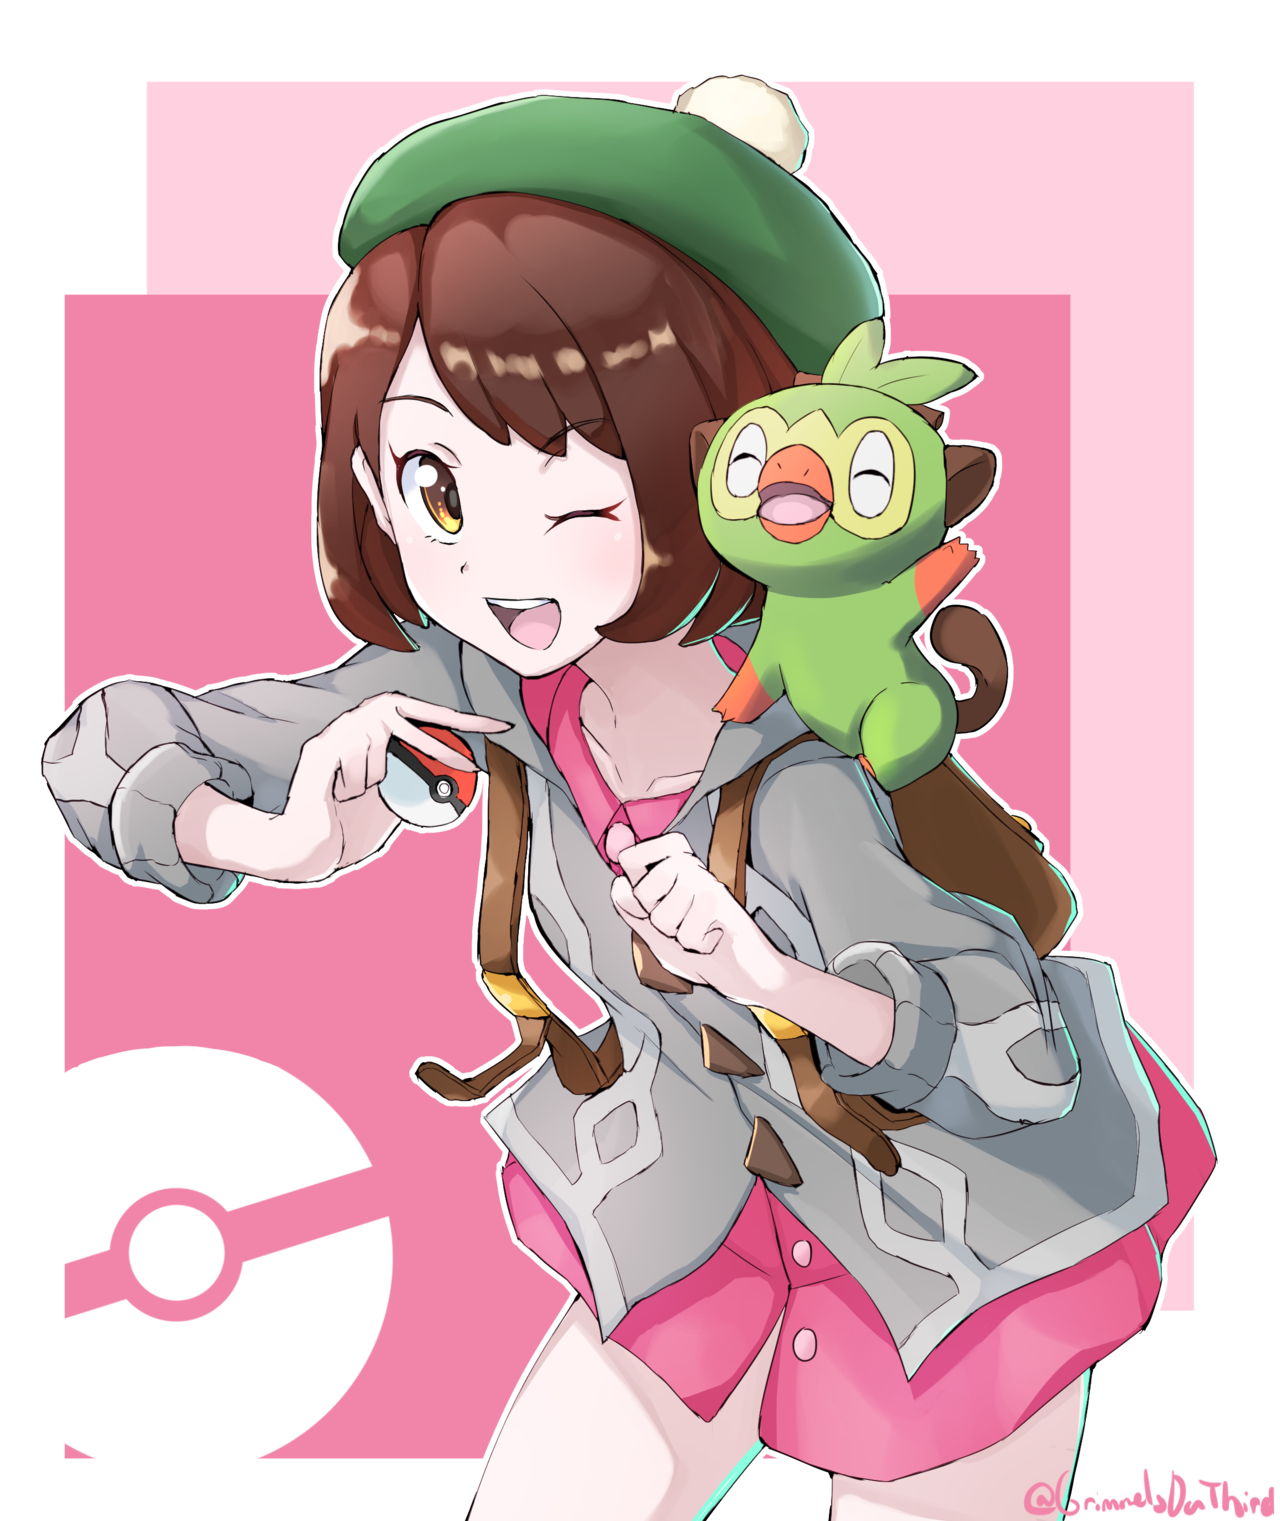 Pokemon Sword And Shield Has Developed Quite The Fanart